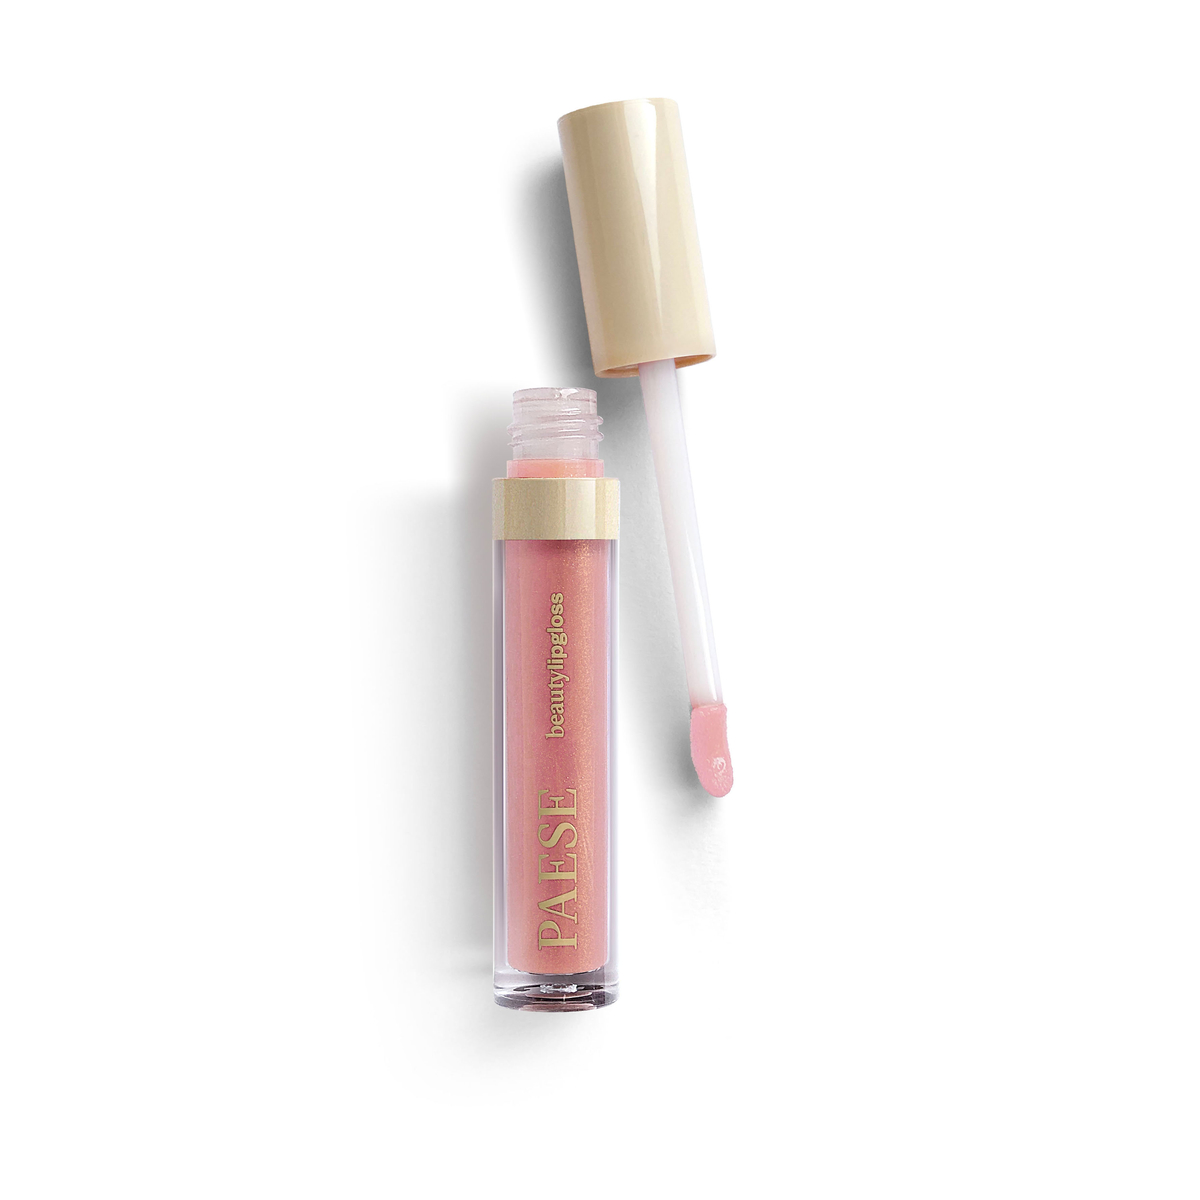 200.0008 PAESE BEAUTY LIPGLOSS 02 Sultry result